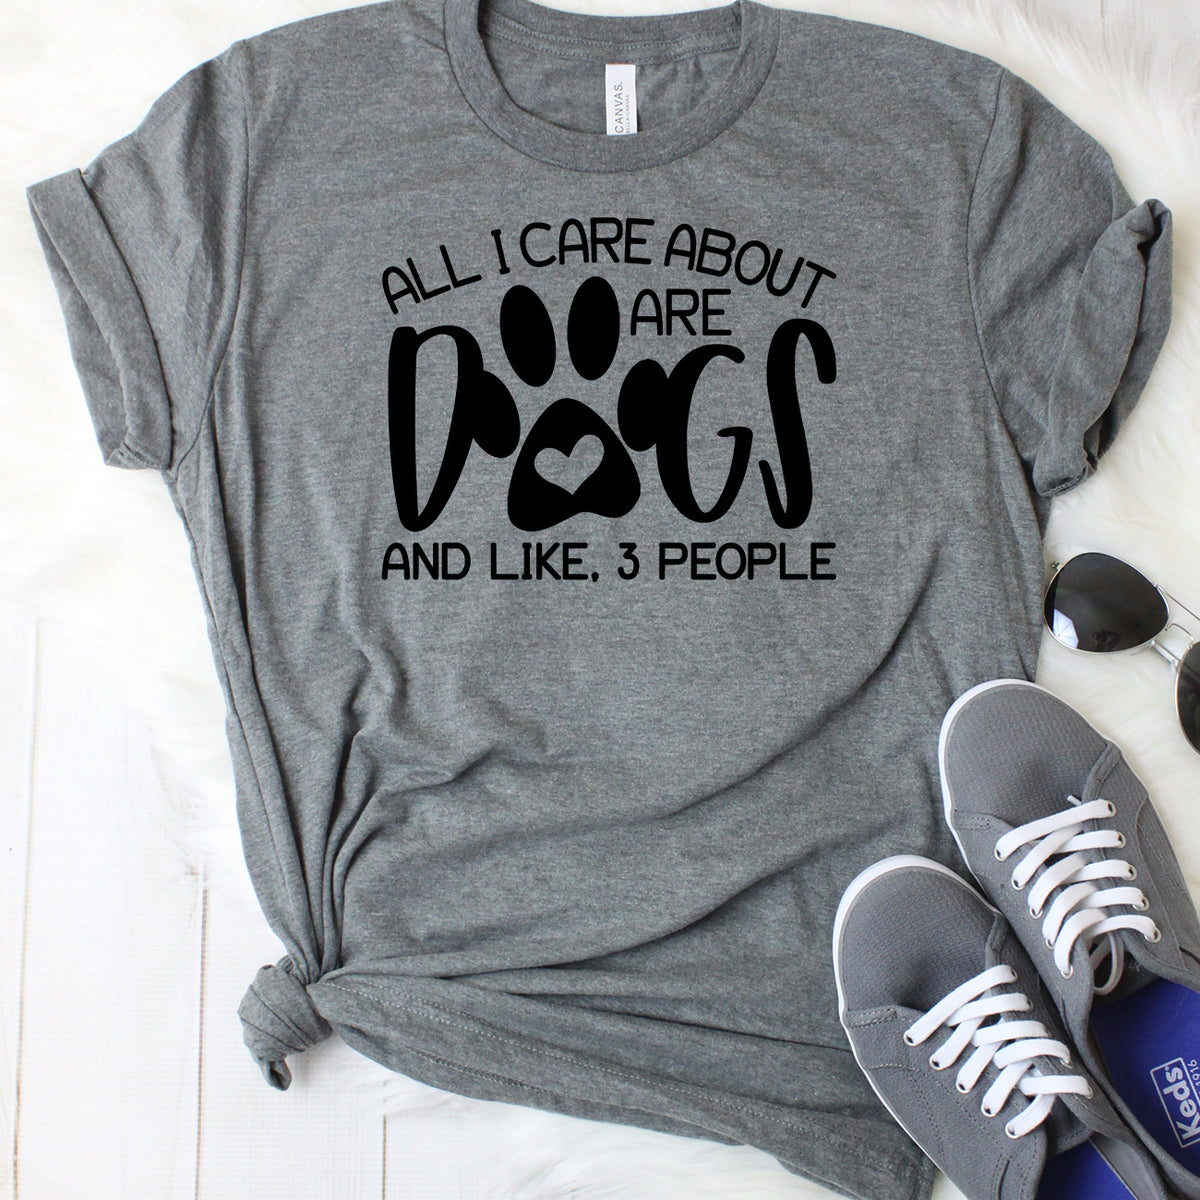 All I Care About Are Dogs and Like, 3 People T-Shirt